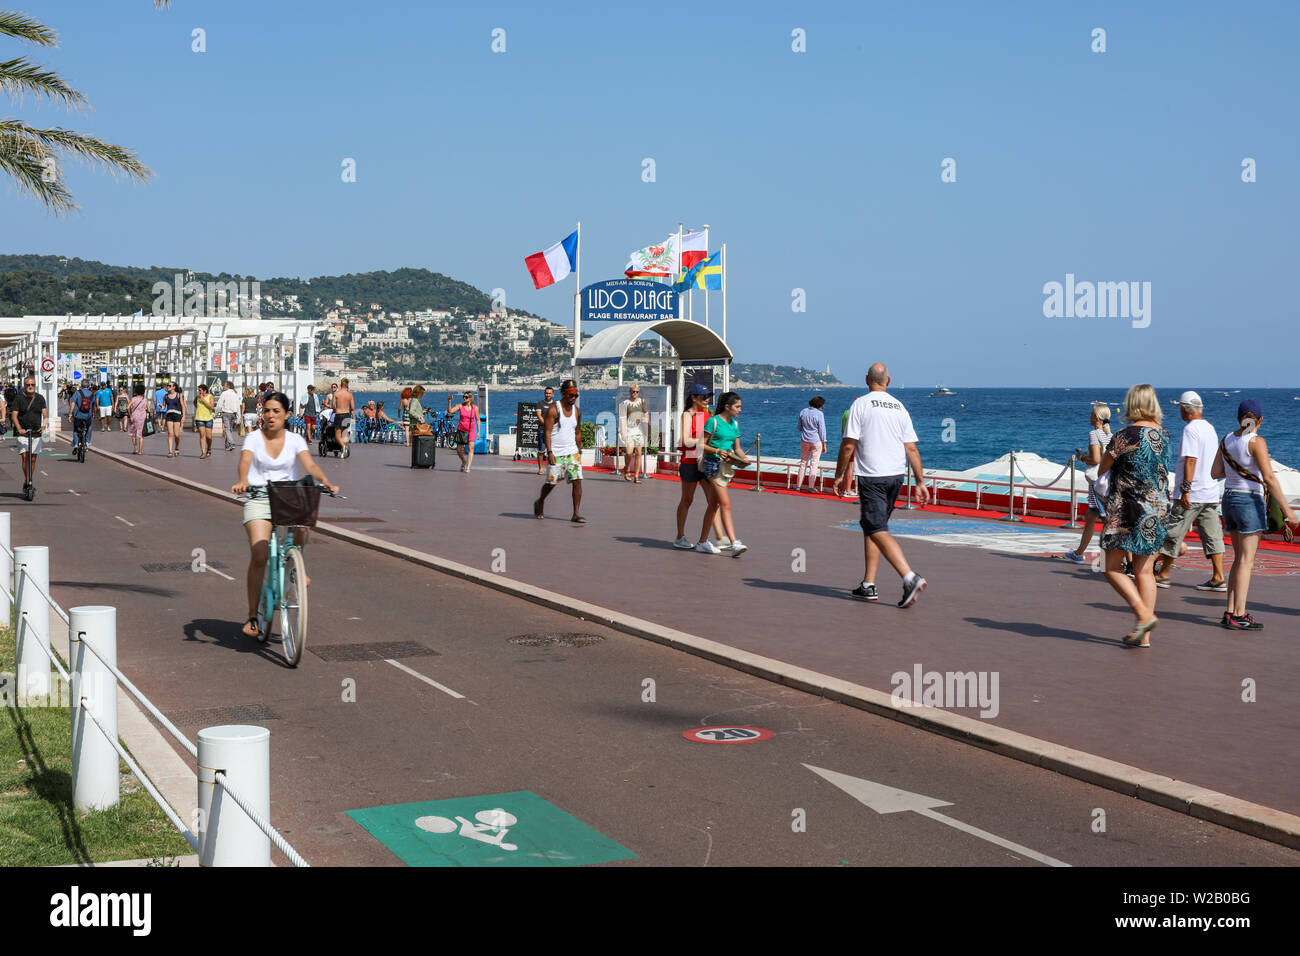 Incidental people on Promenades des Anglais beach boulevard in Nice, France Stock Photo